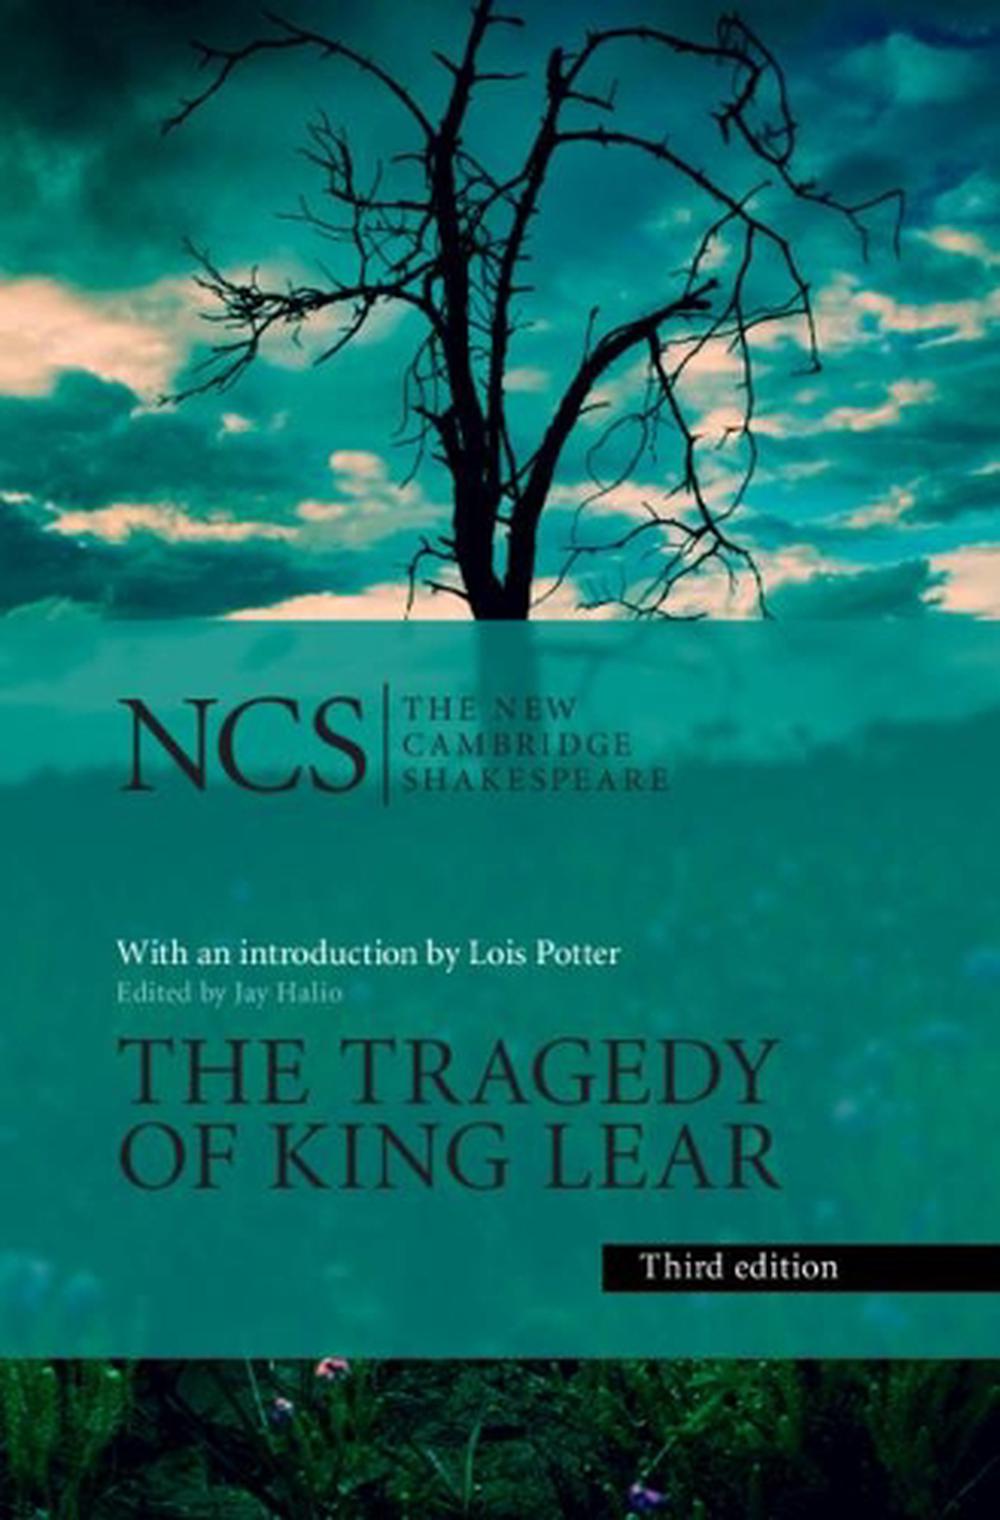 9781316646977　Paperback,　at　The　Nile　by　Lear　Shakespeare,　of　Tragedy　The　King　William　Buy　online